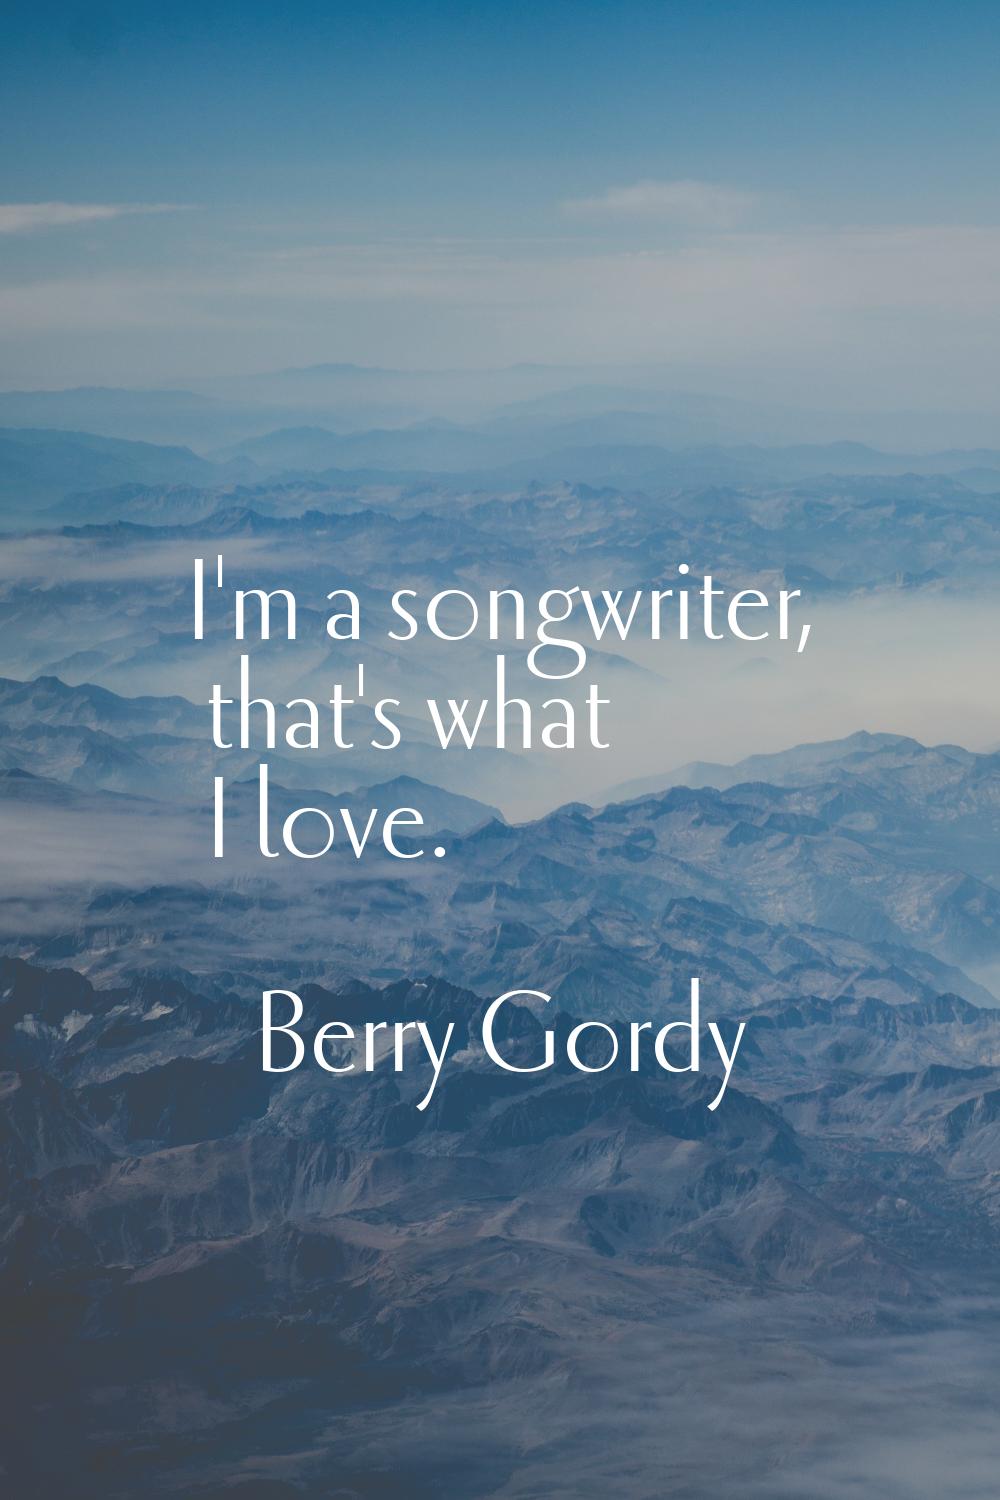 I'm a songwriter, that's what I love.